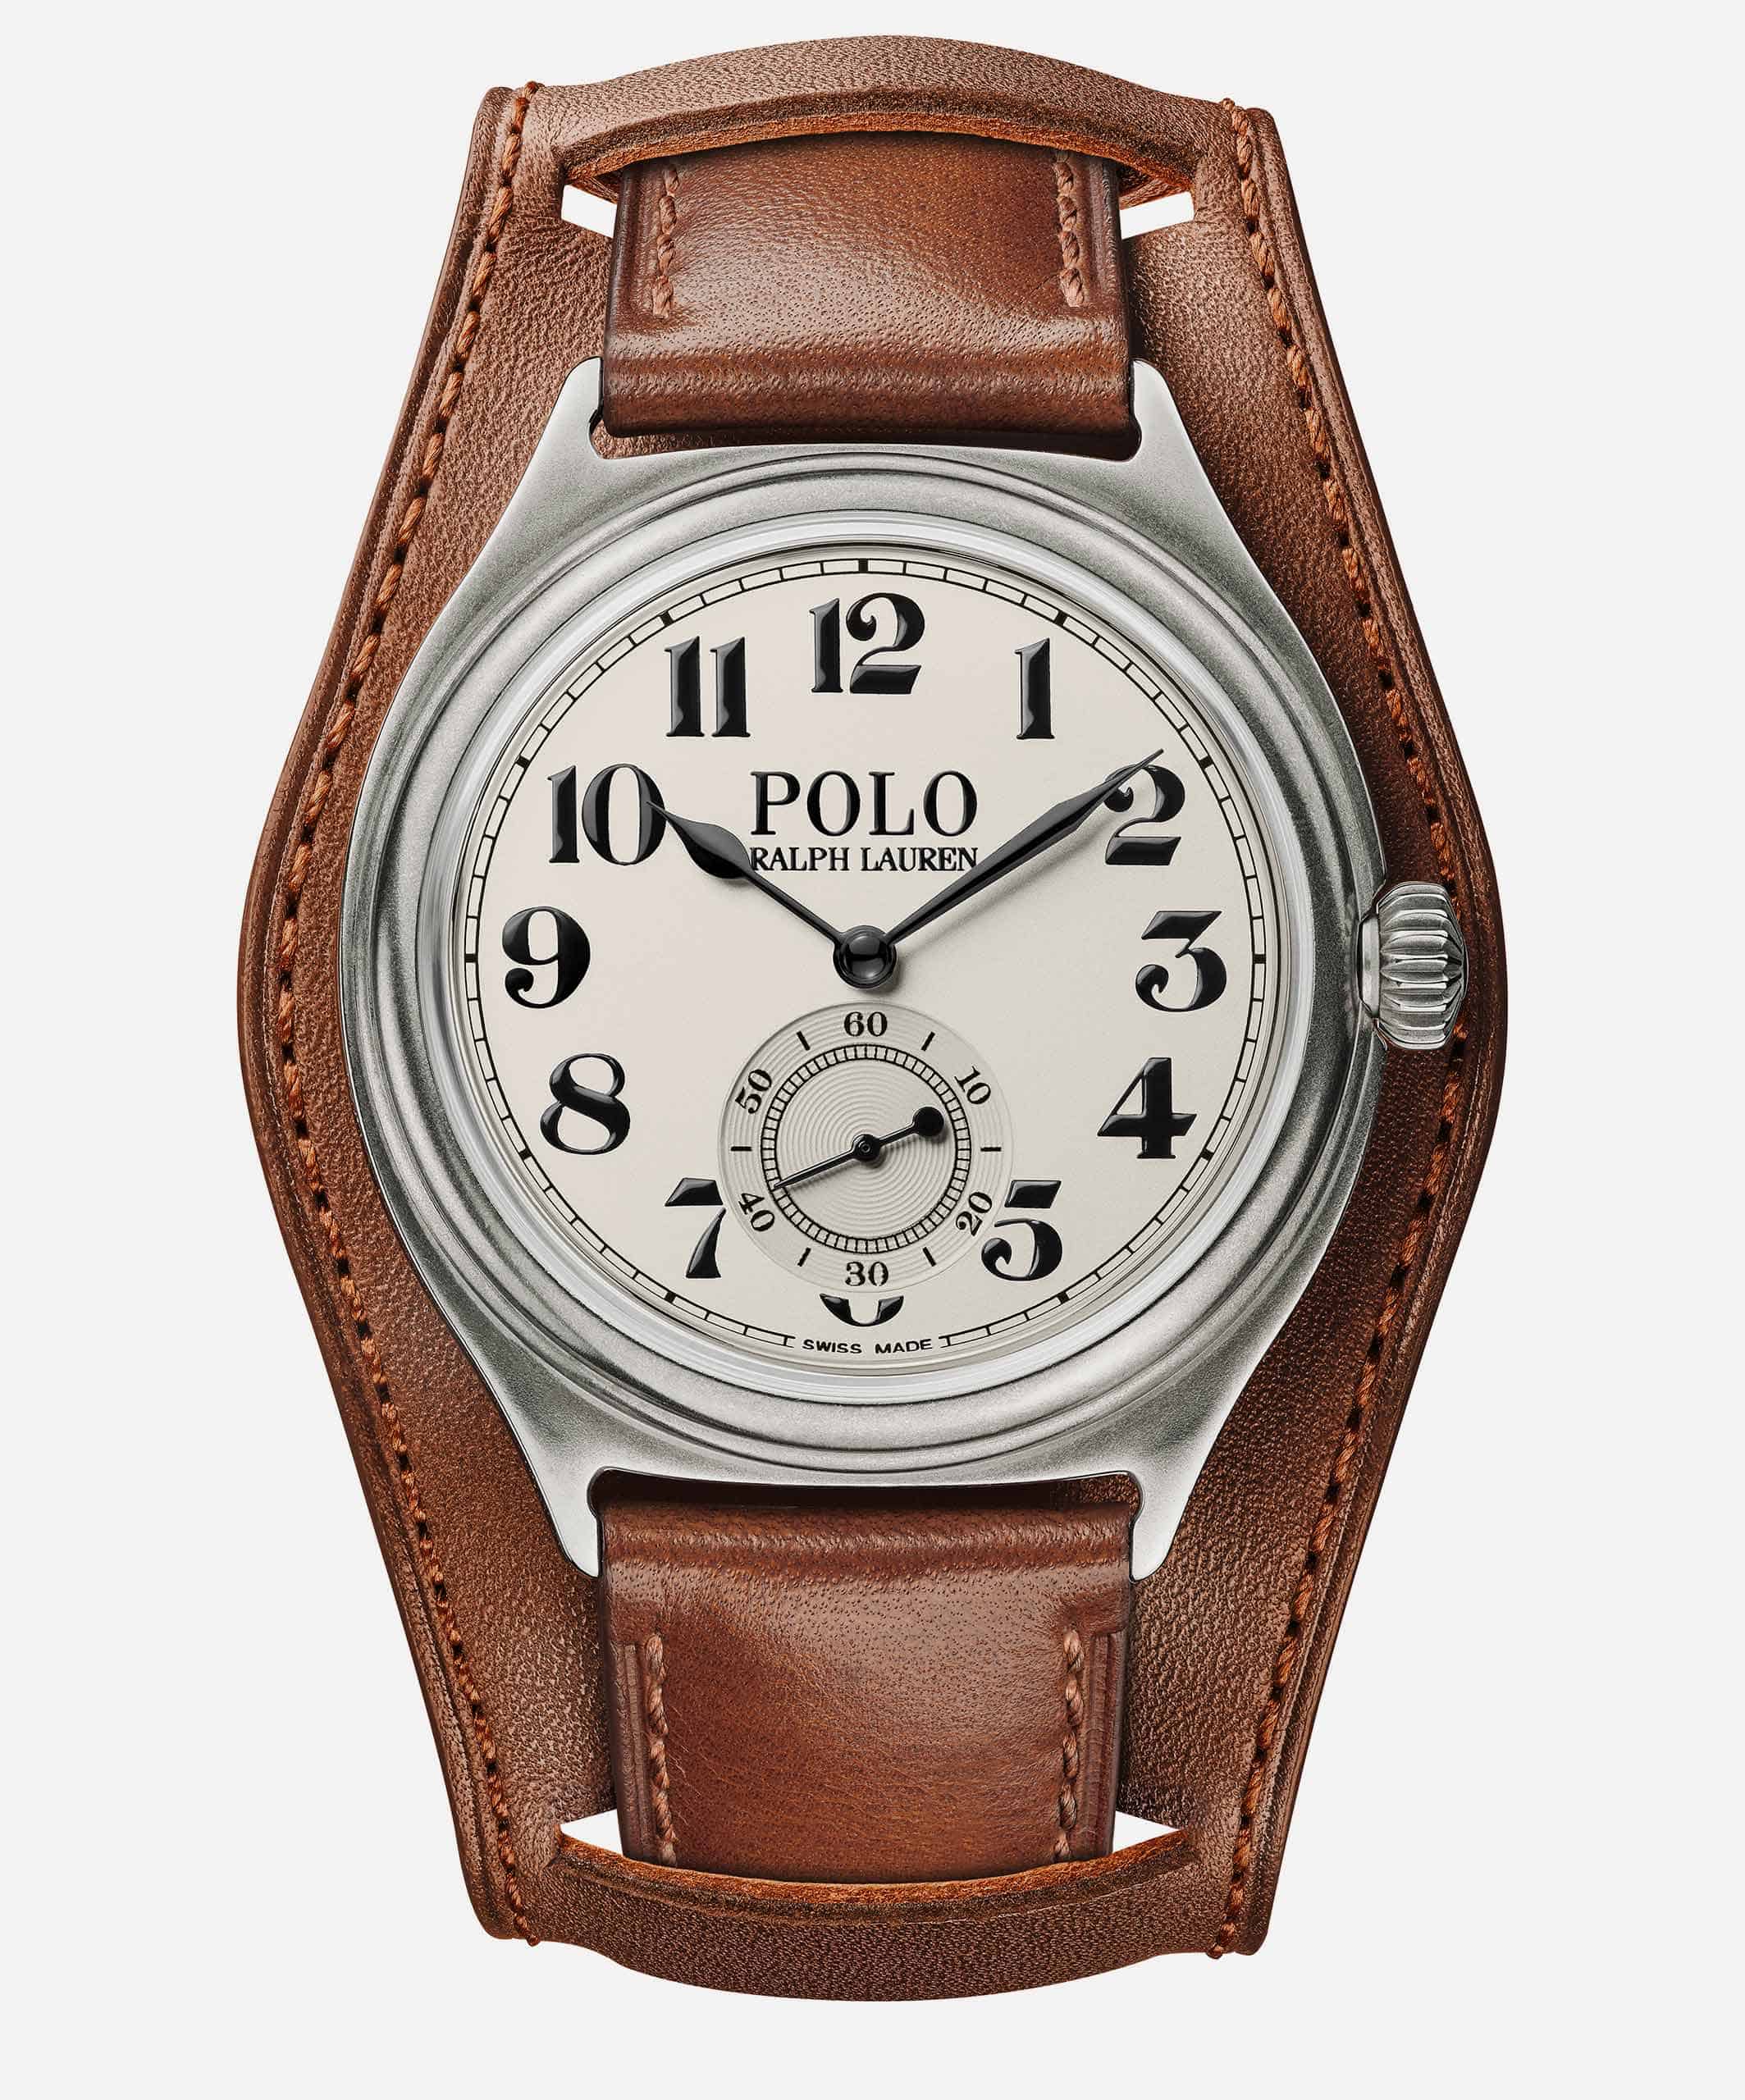 Why Should You Pay Attention to Ralph Lauren’s Watches" The Polo Vintage 67 Might Answer that Question